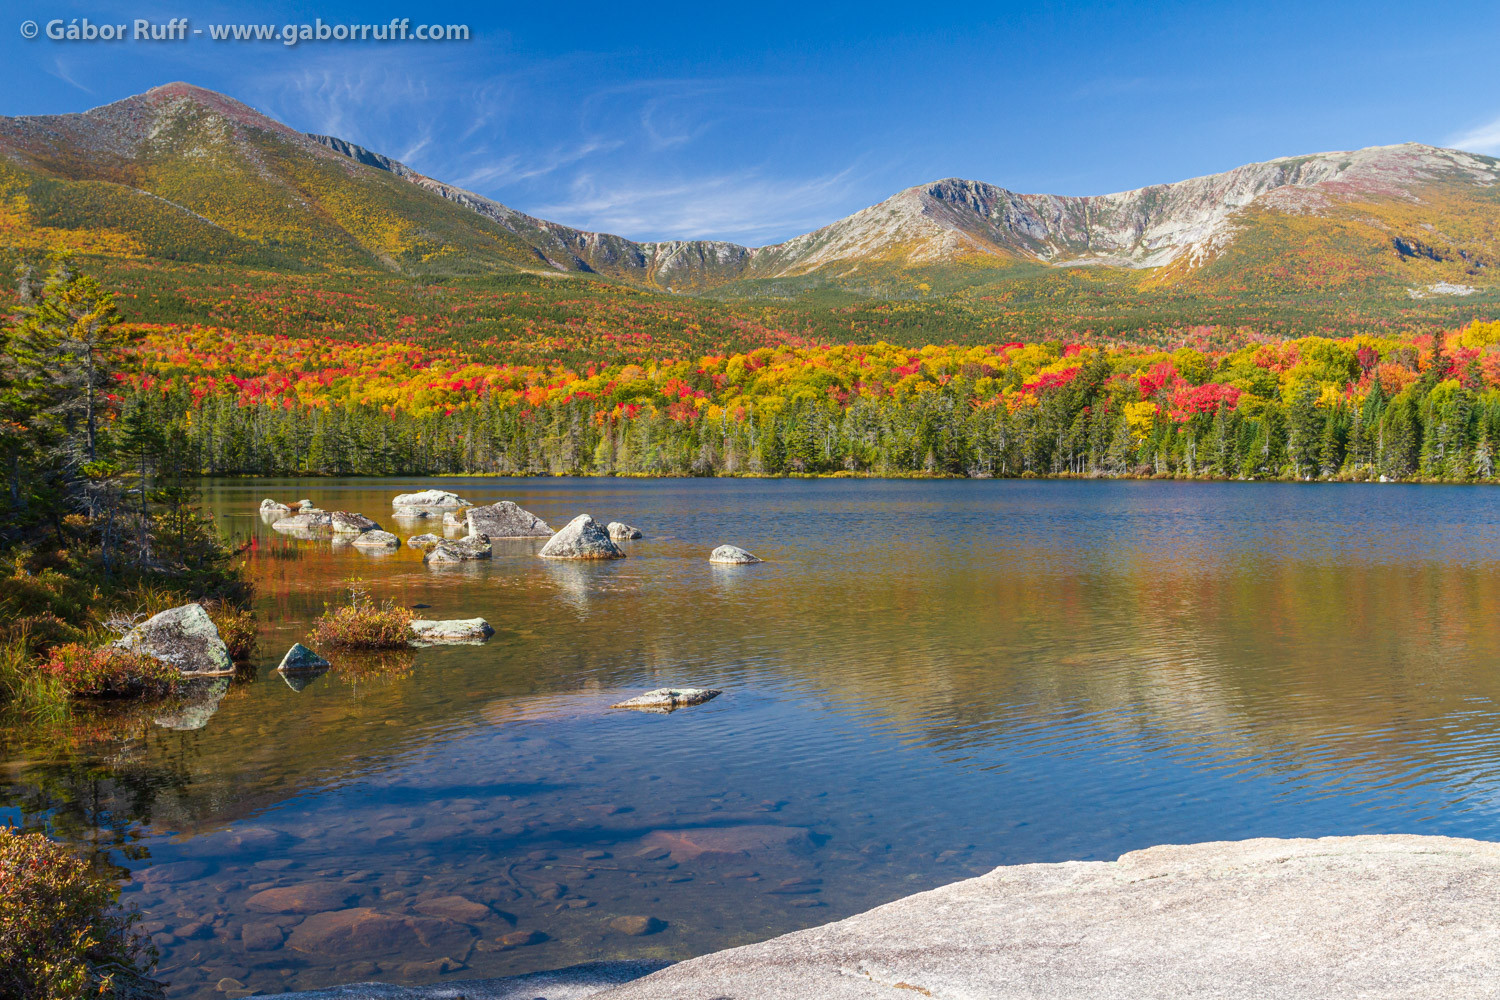 What to do in baxter state park